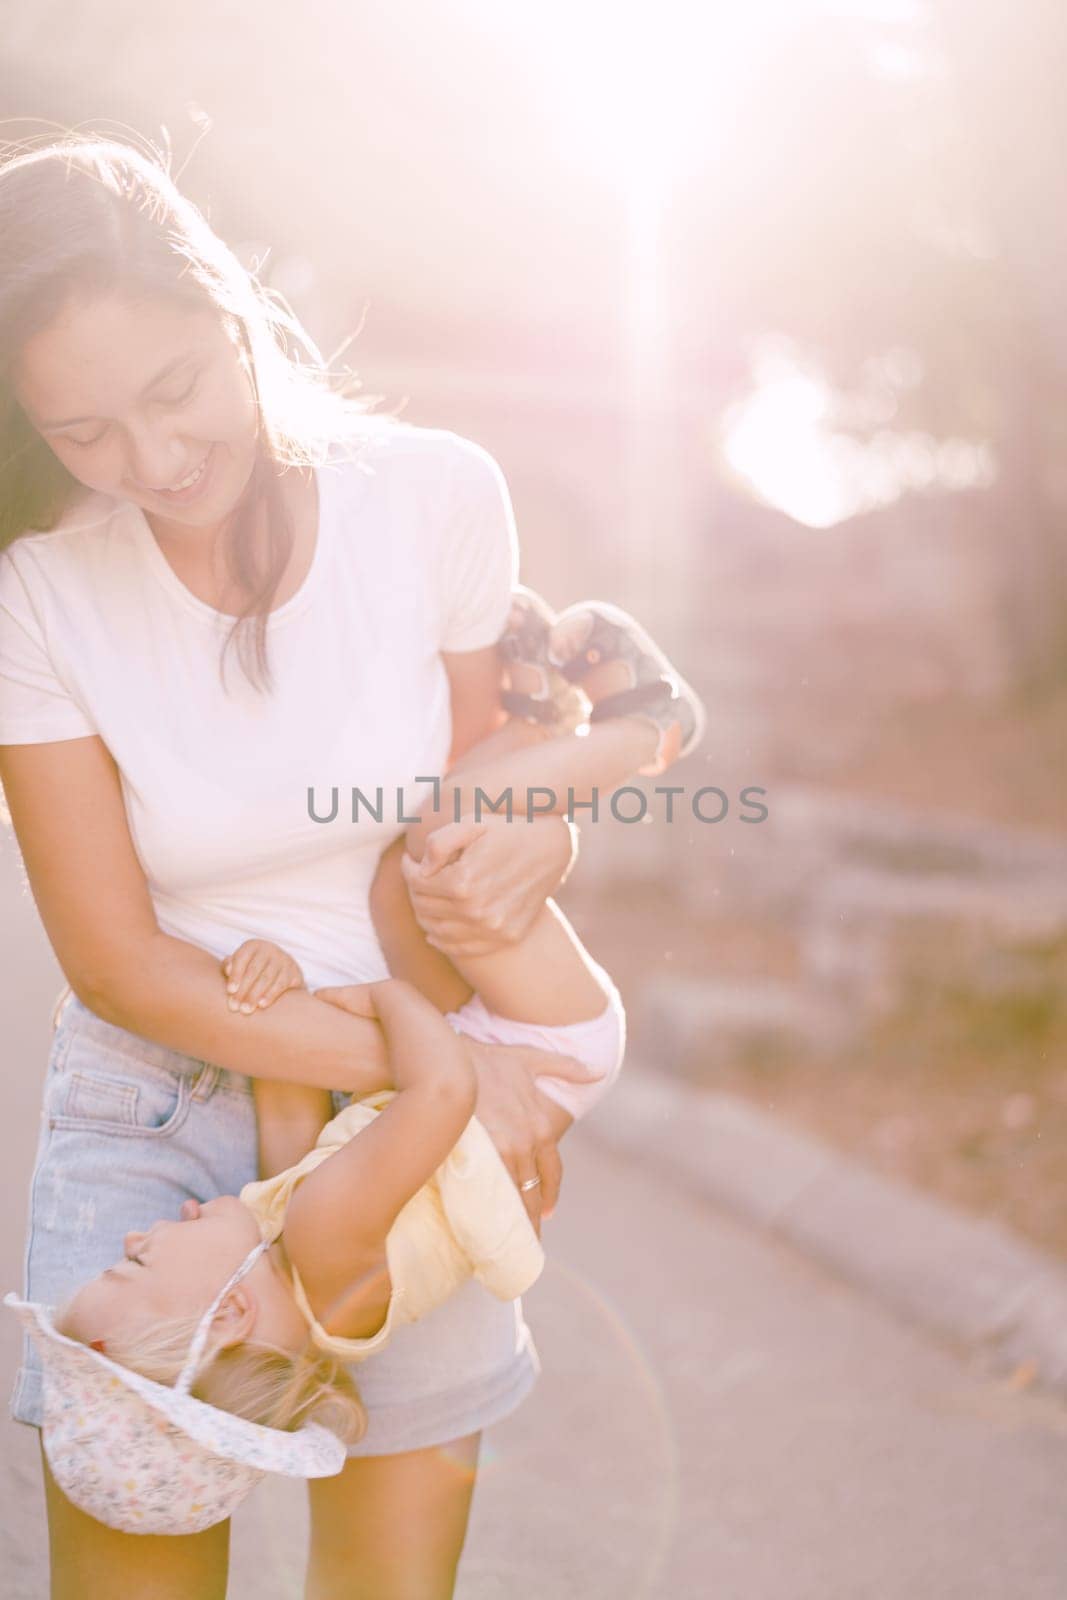 Smiling mom holding little girl upside down in bright sunlight by Nadtochiy